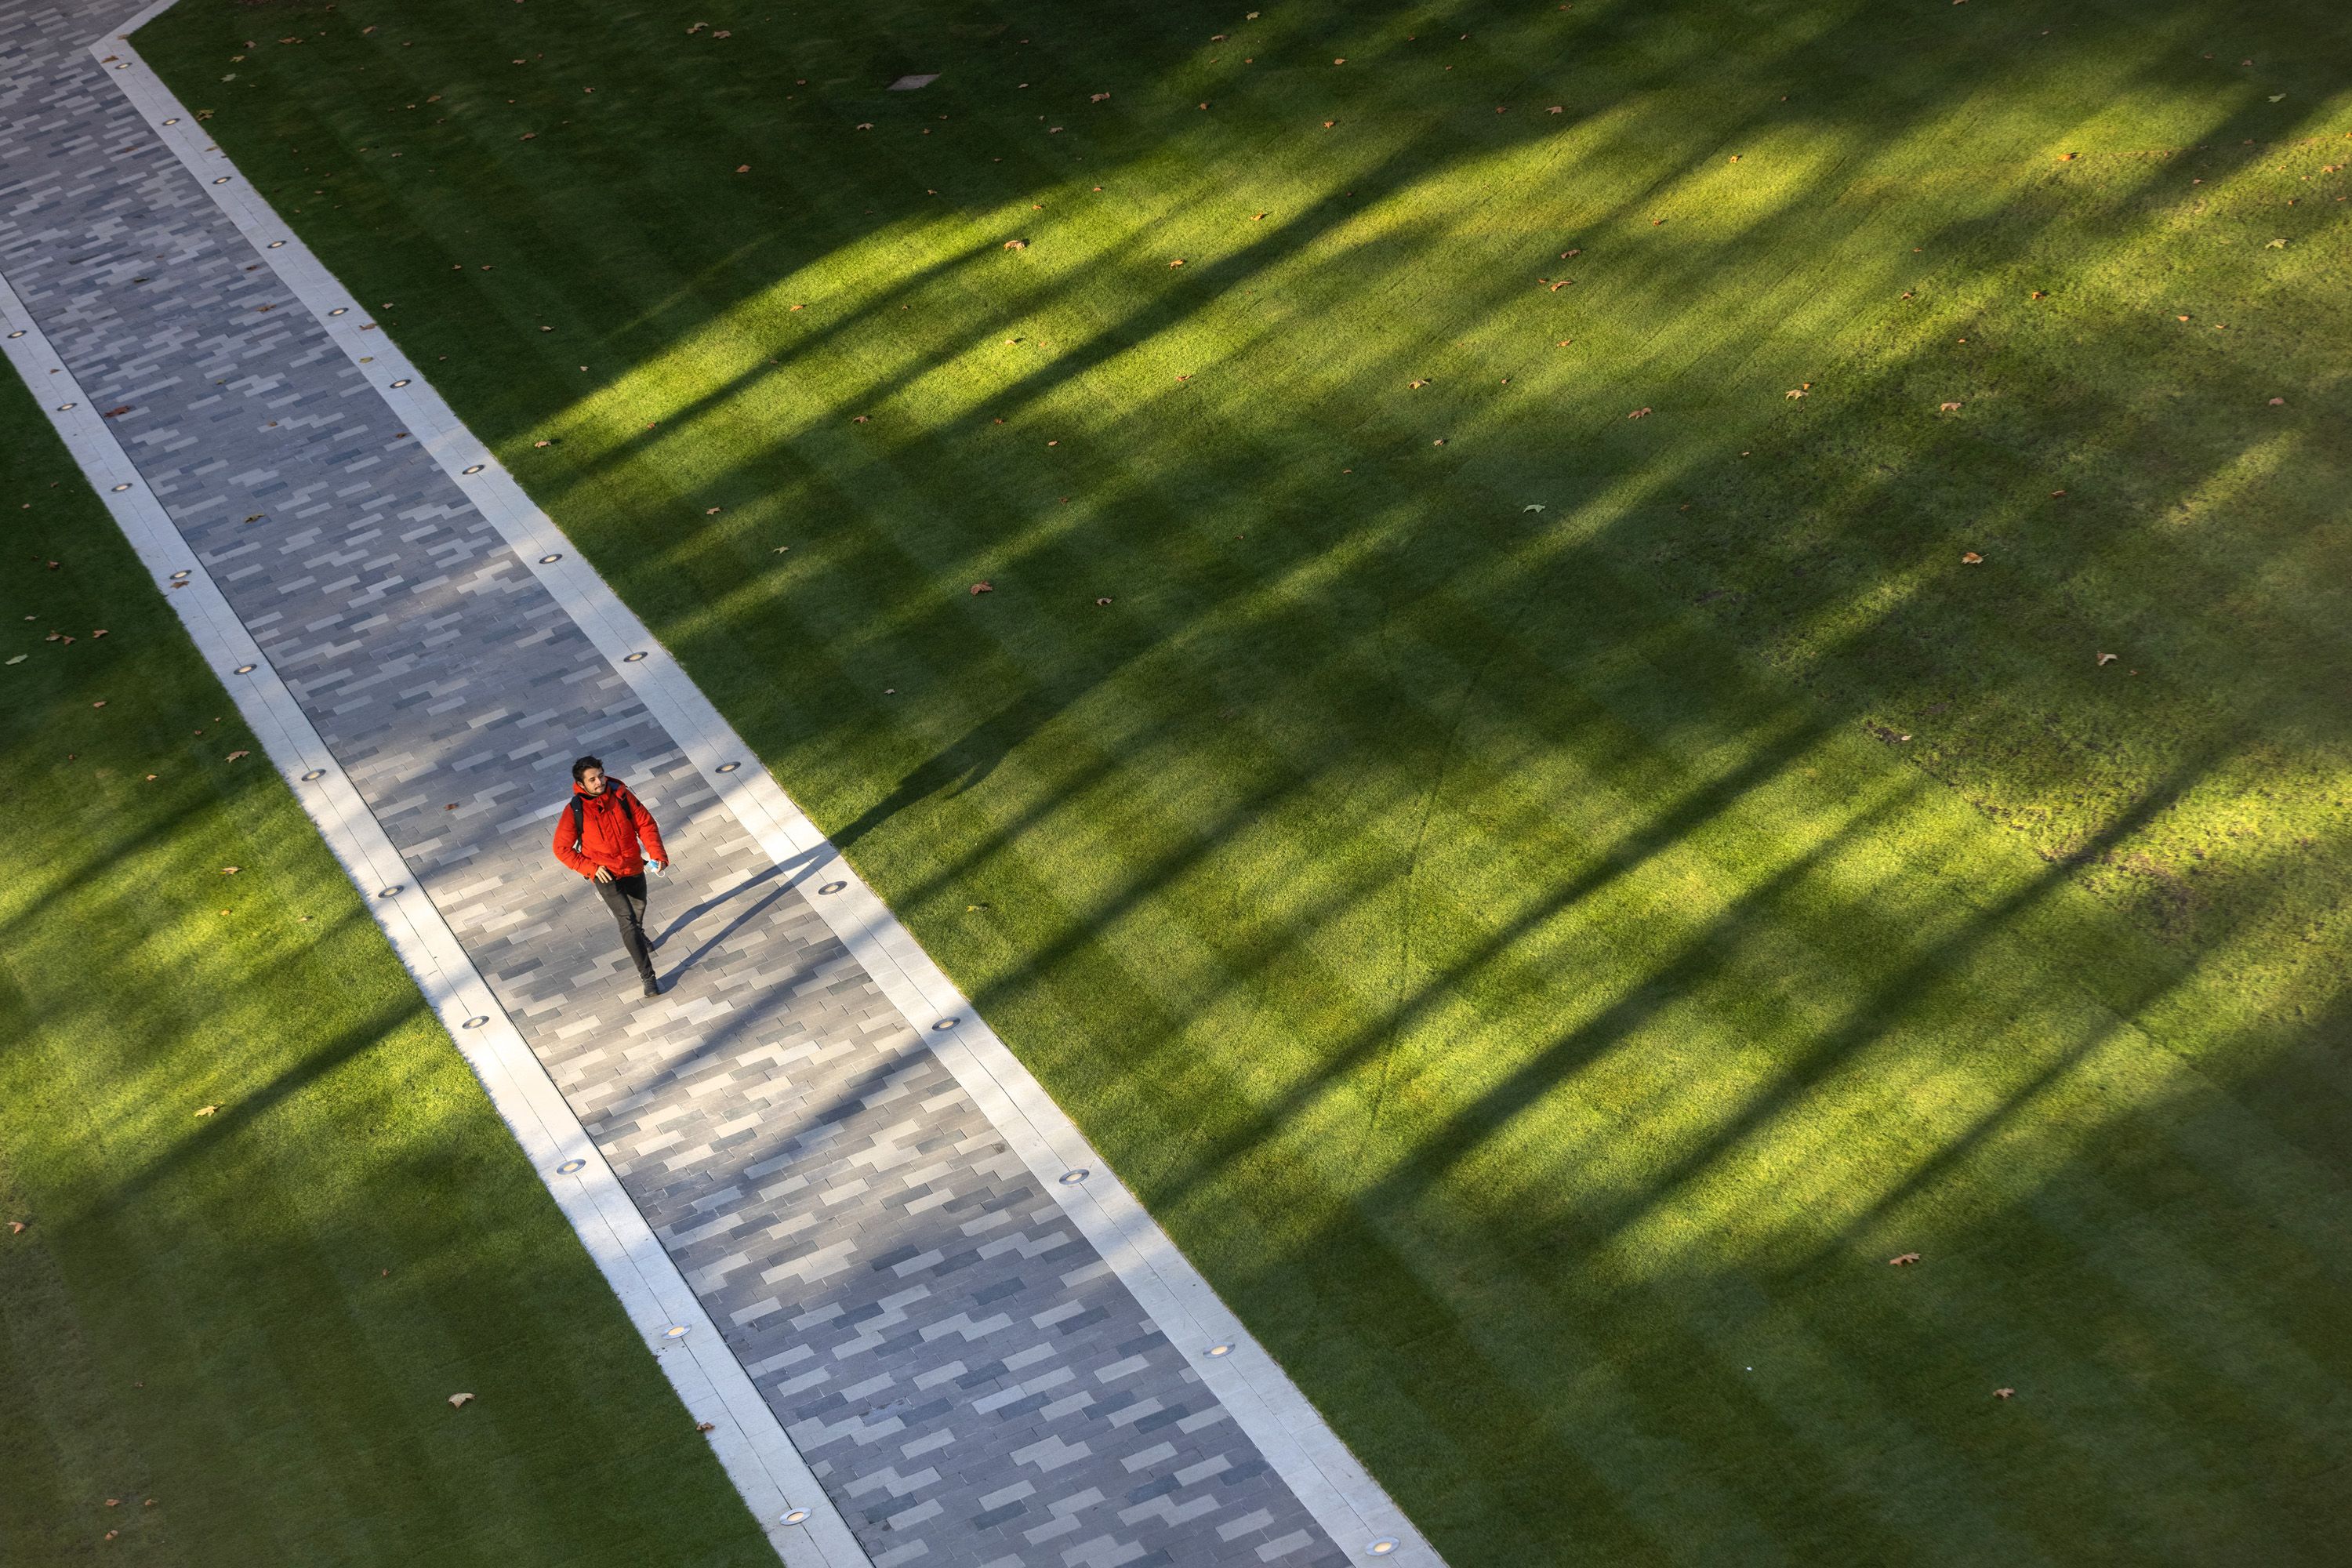 A man in a bright red jacket walks along a paved path that cuts across a grass lawn in a dramatic composition with patterns of reflected sunshine